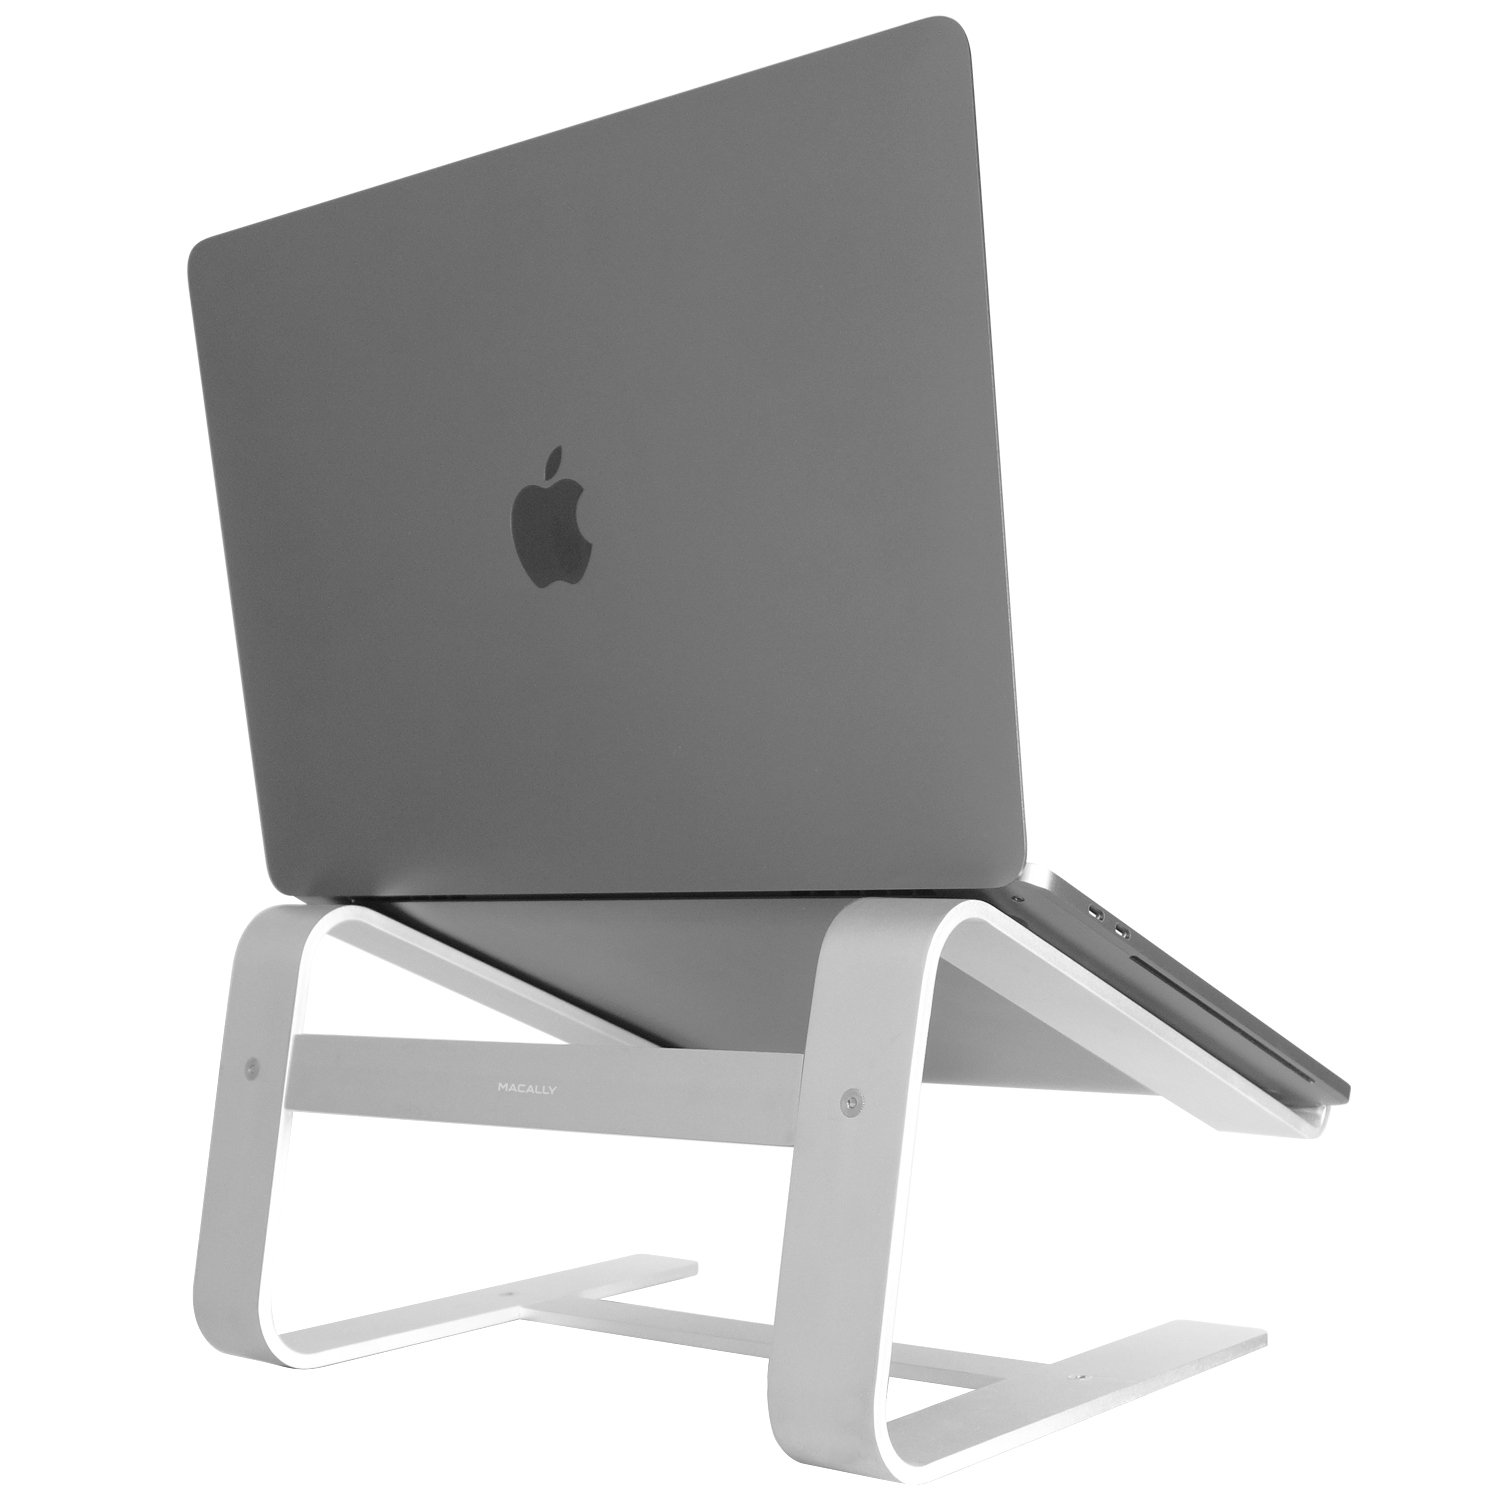 Macally Aluminum Laptop Stand for Desk & All Apple Macbook 12" / Pro / Air, Chromebook, Samsung, Acer, HP, Dell, & any Notebook between 10" to 17.3" (ASTAND)